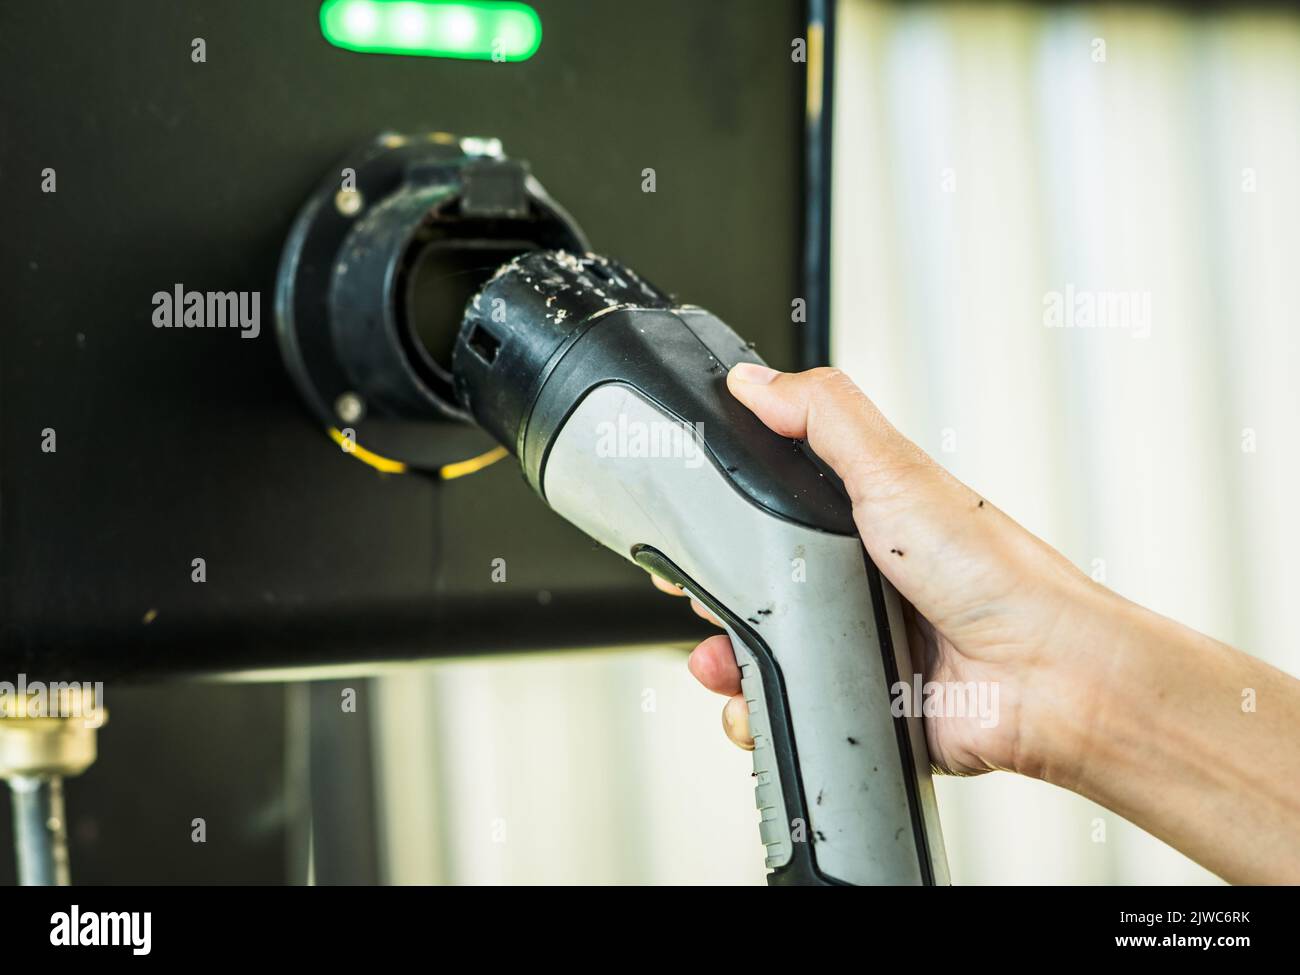 Abandoned electric vehicle charging station. Electric vehicle charging station infrastructure problems. Hand holding EV charger that hasn't been used Stock Photo